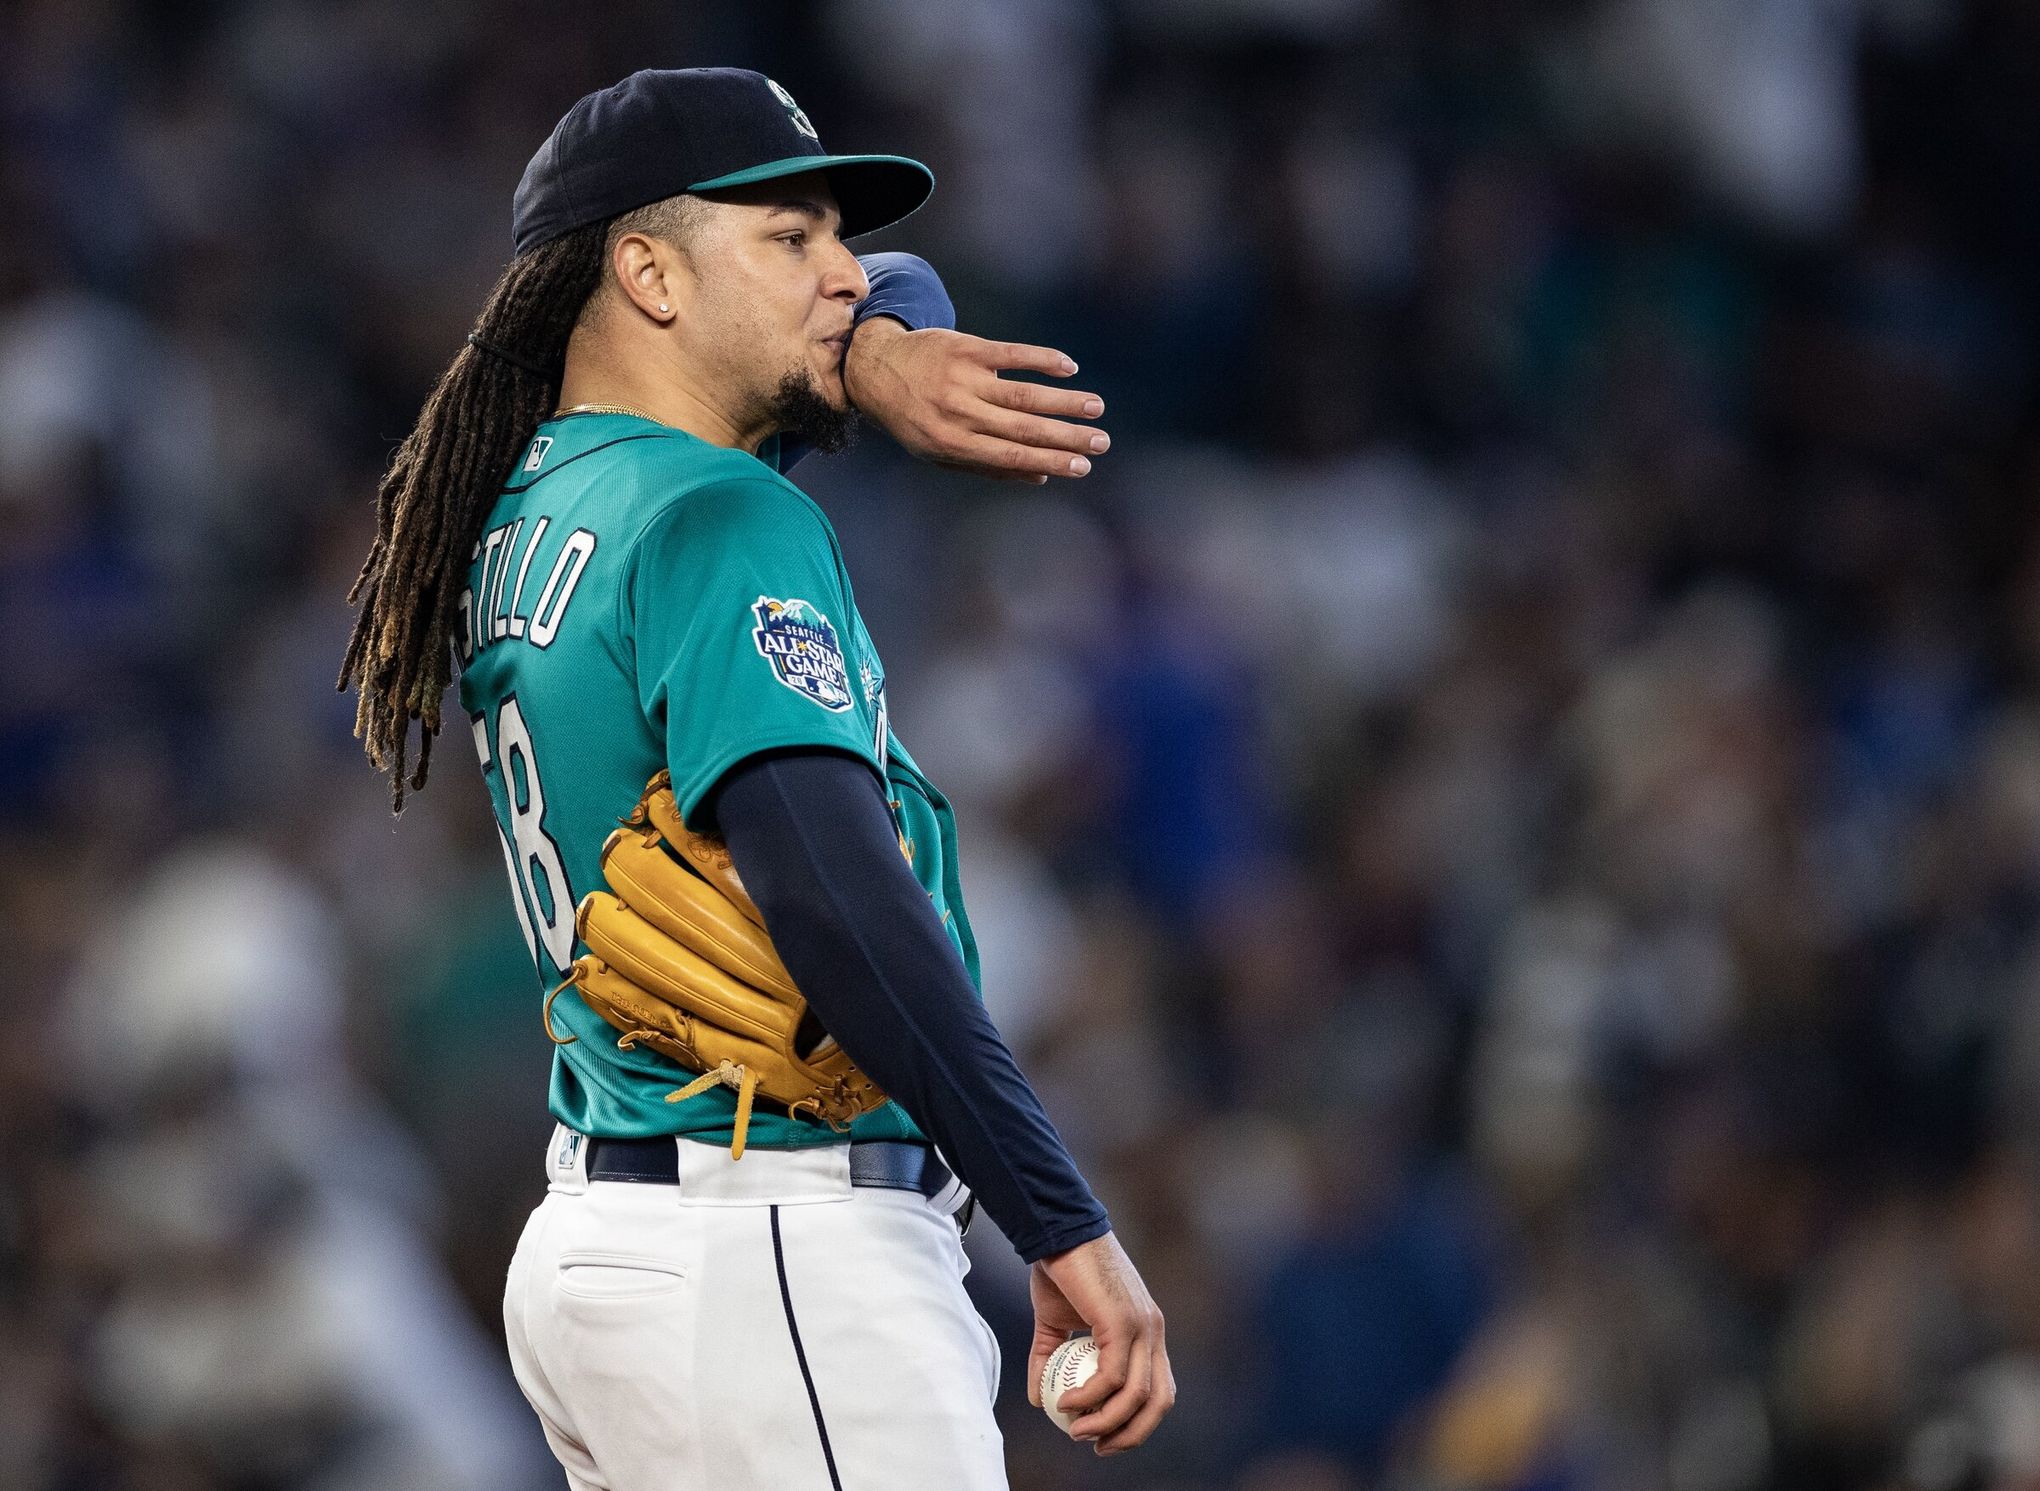 As Cal Raleigh implores them to get better, will Mariners get the